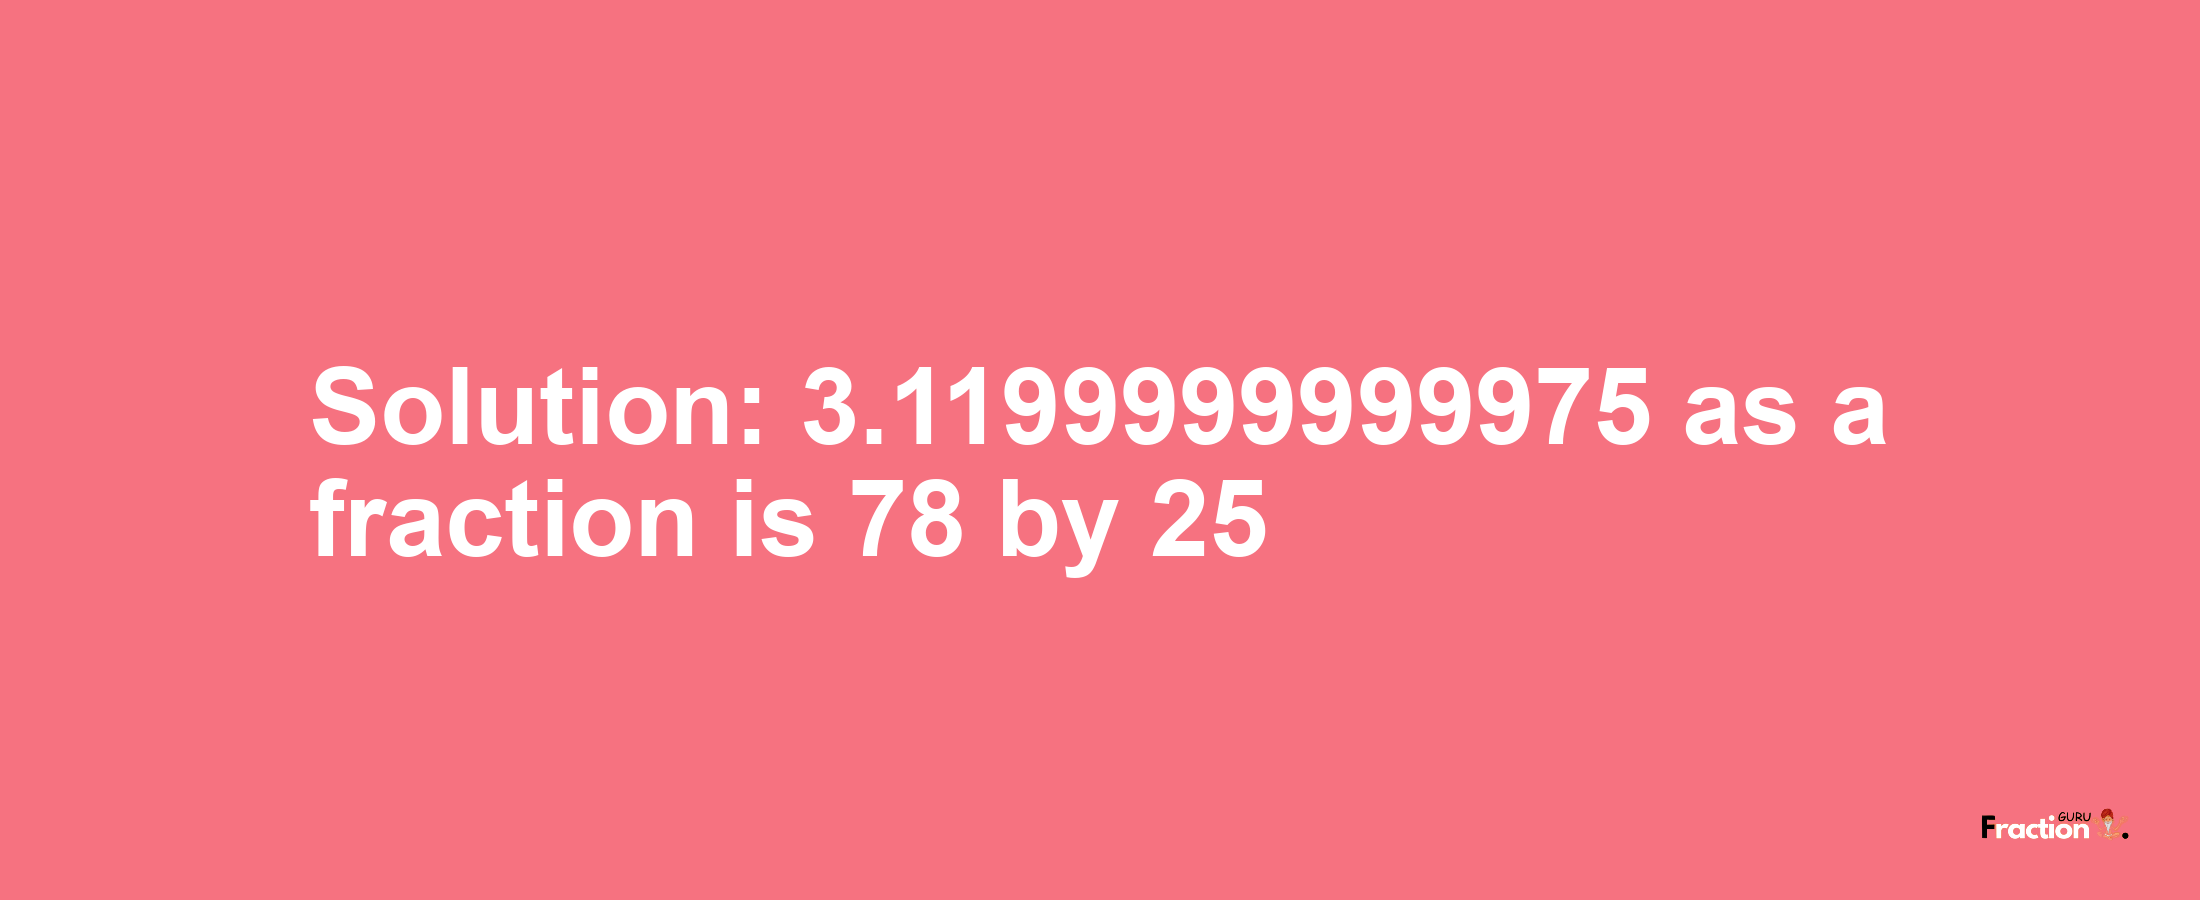 Solution:3.1199999999975 as a fraction is 78/25